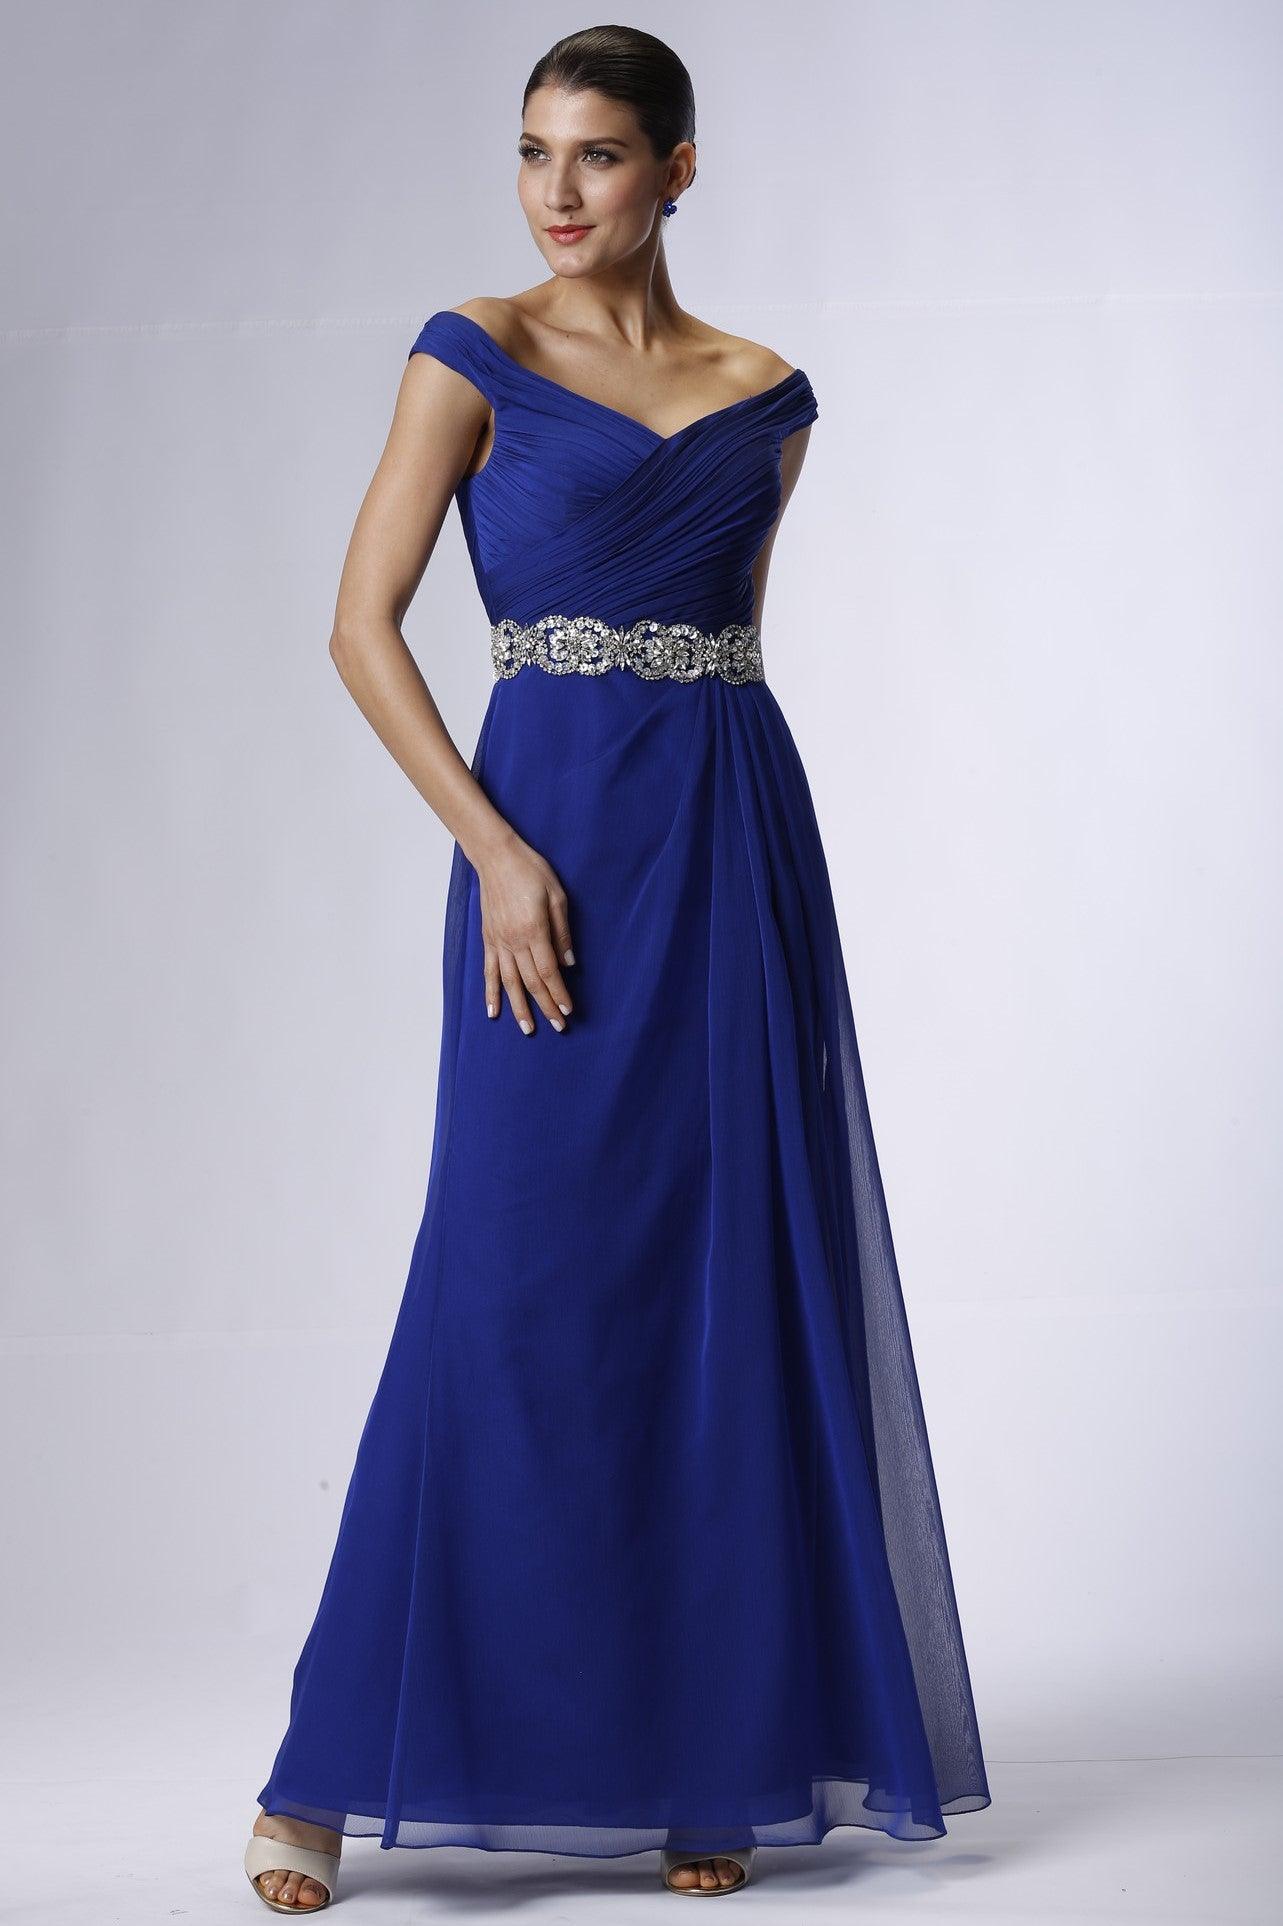 TIANNA 30% OFF WAS £310 NOW - Adore Bridal and Occasion Wear